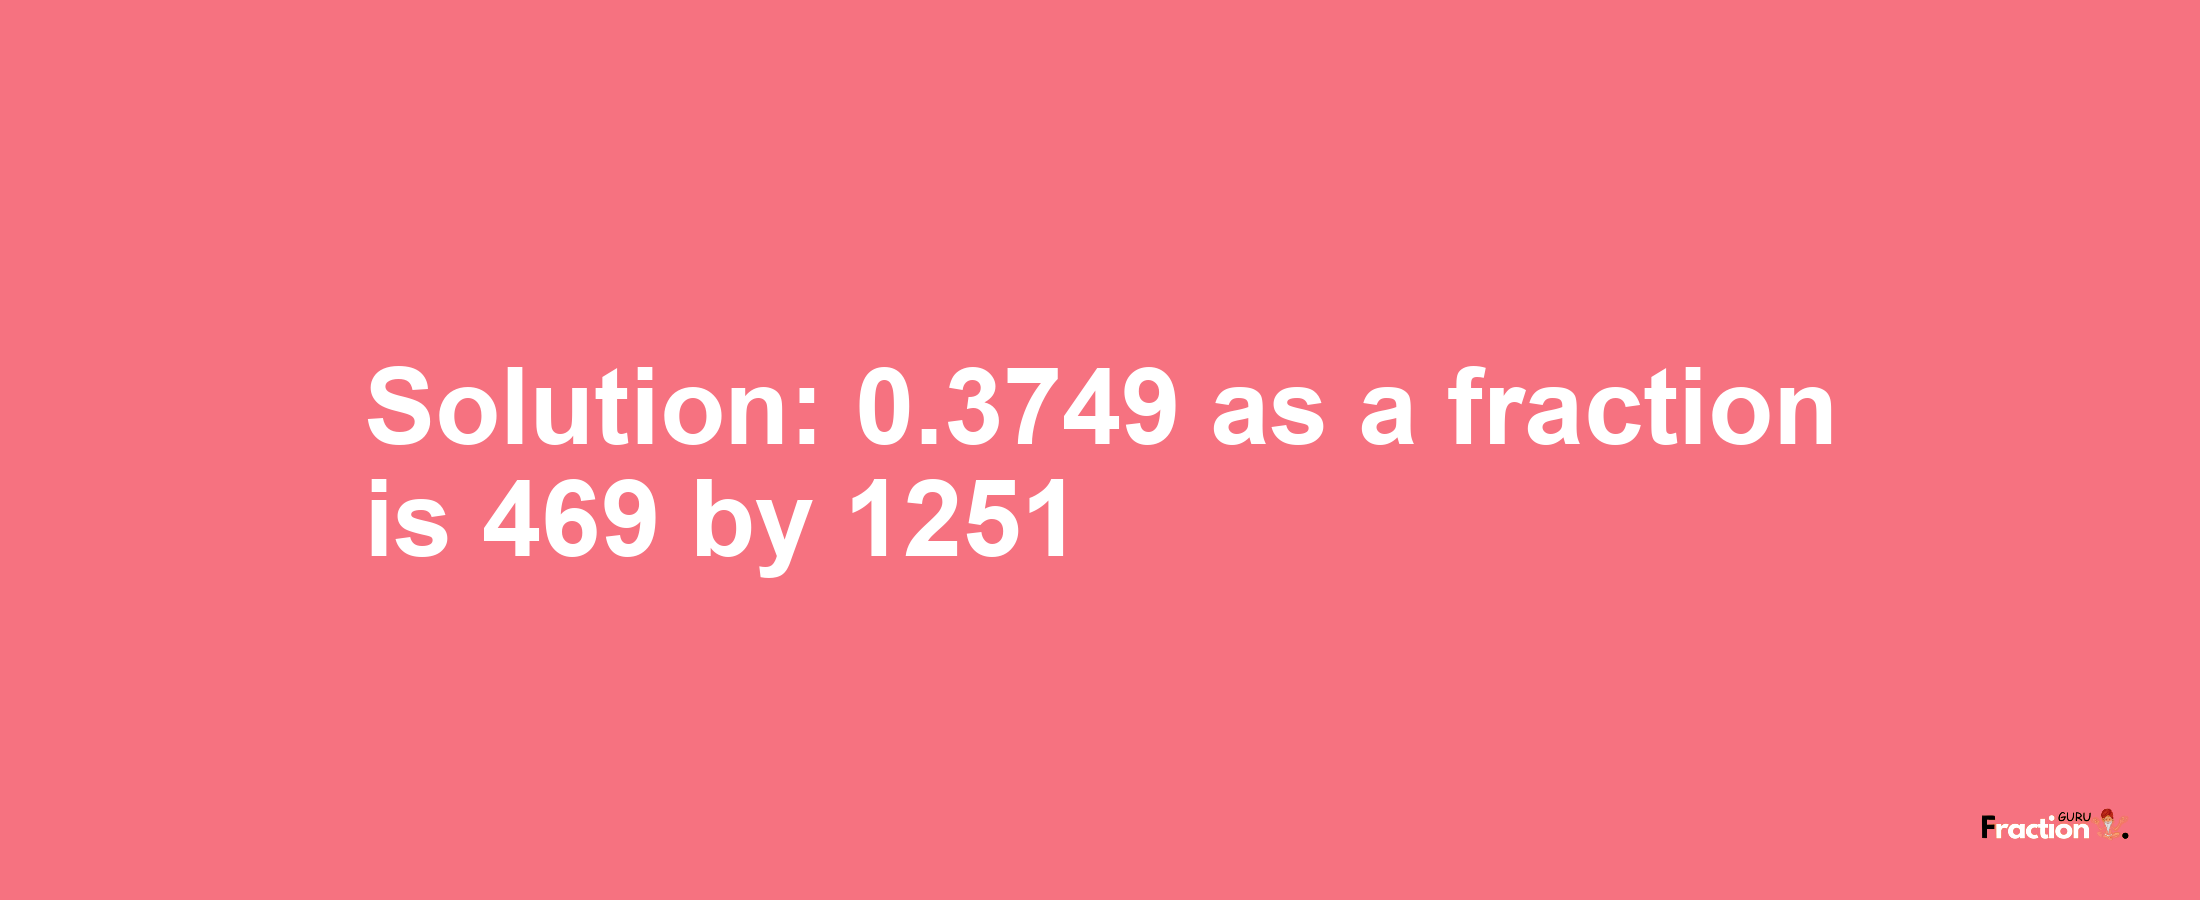 Solution:0.3749 as a fraction is 469/1251